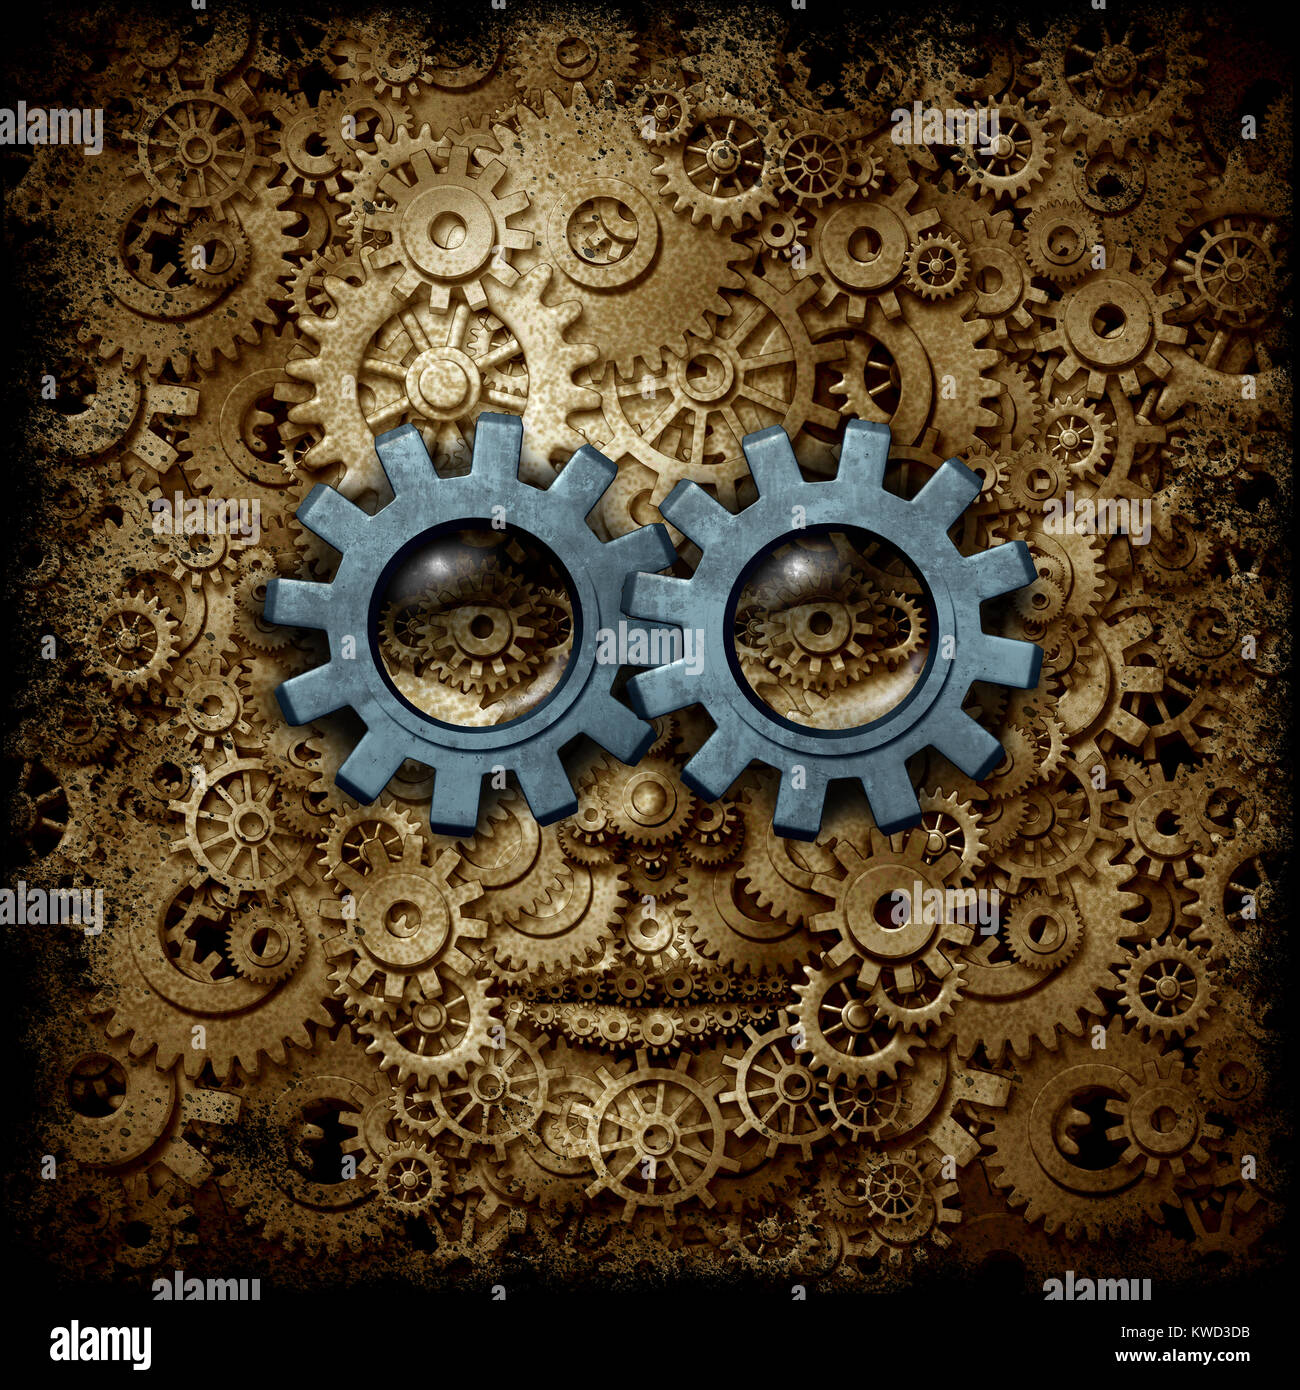 Steam punk or steampunk sci-fi or science fiction human head made of gear and cog machine wheels as a business or psychology metaphor. Stock Photo